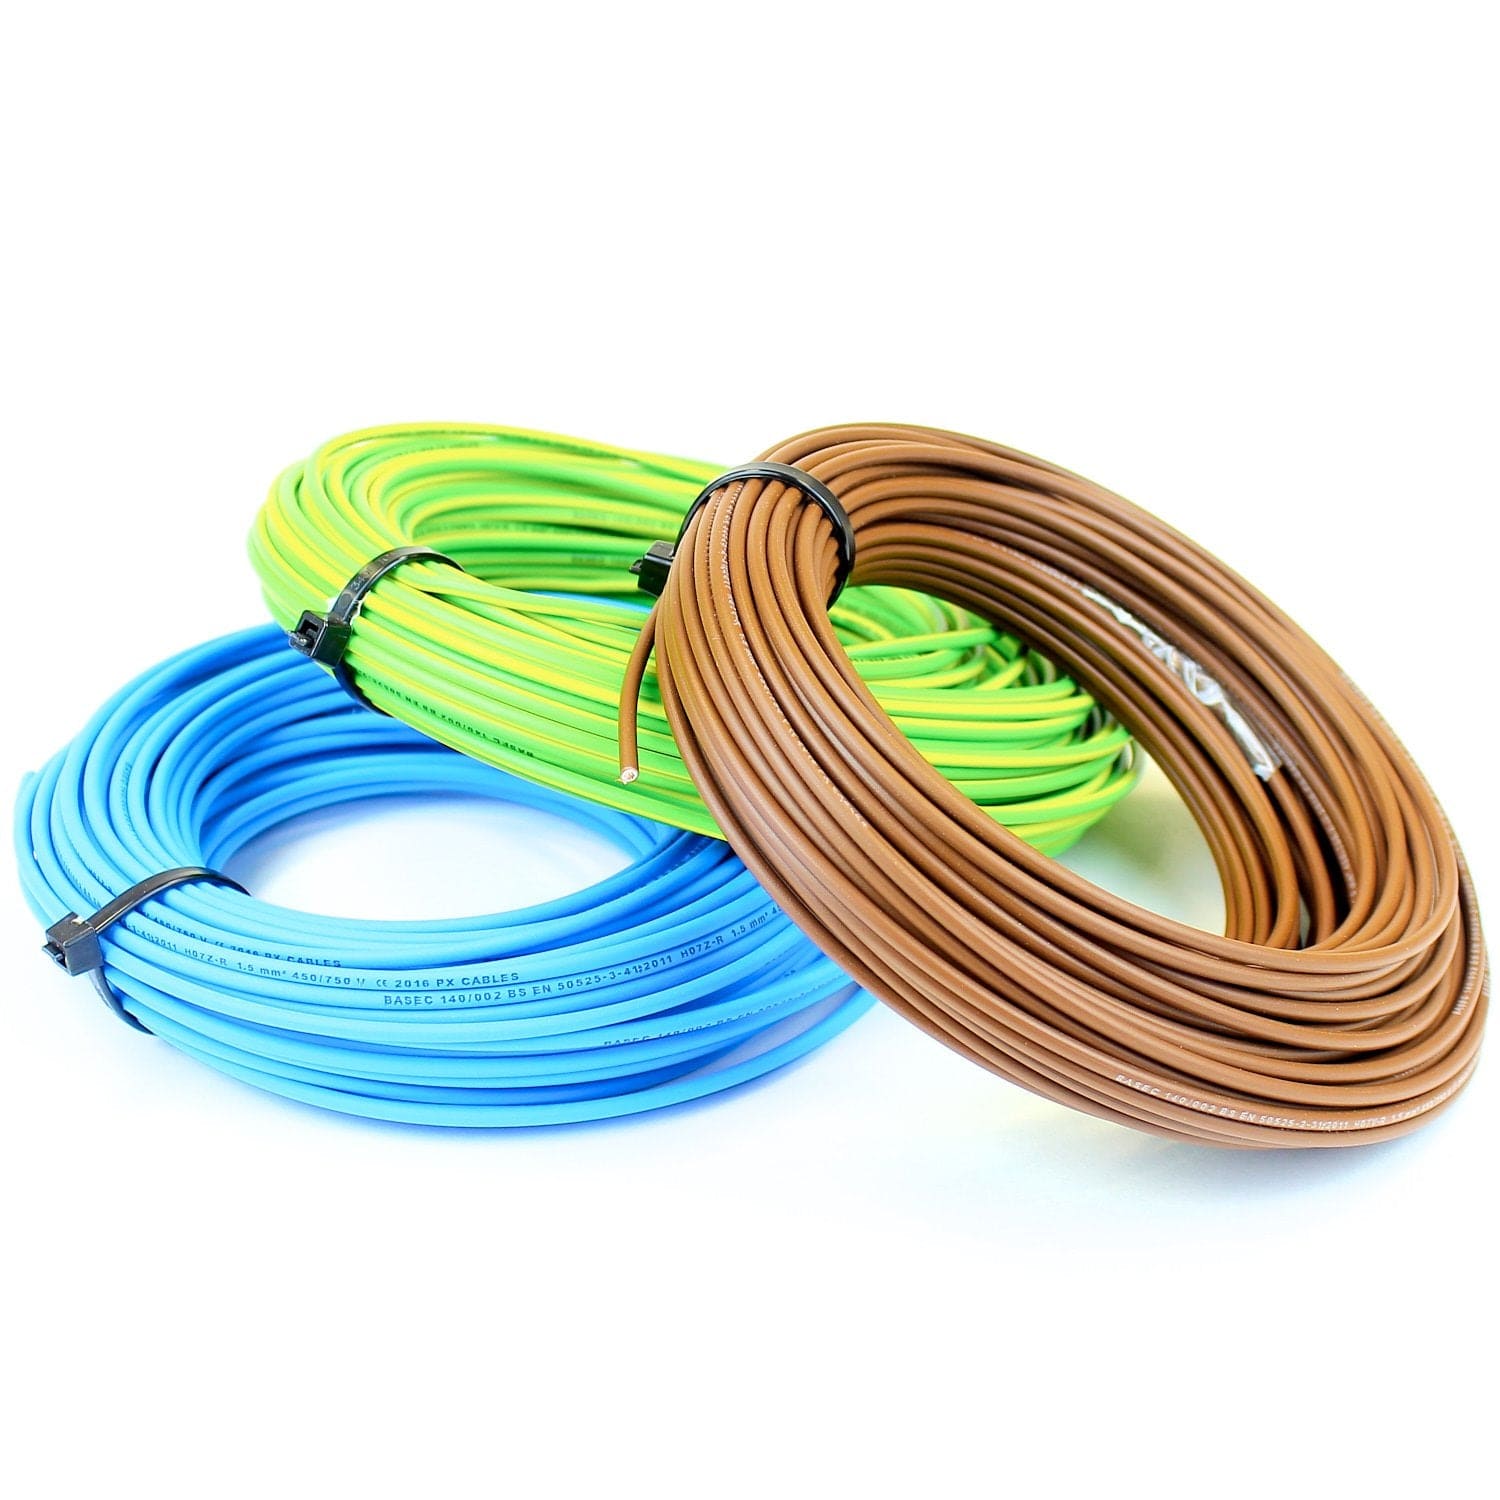 Buy Expert Cables 6mm Conduit Cable 100m Online in Ghana - Supply Master Cables & Wires Buy Tools hardware Building materials